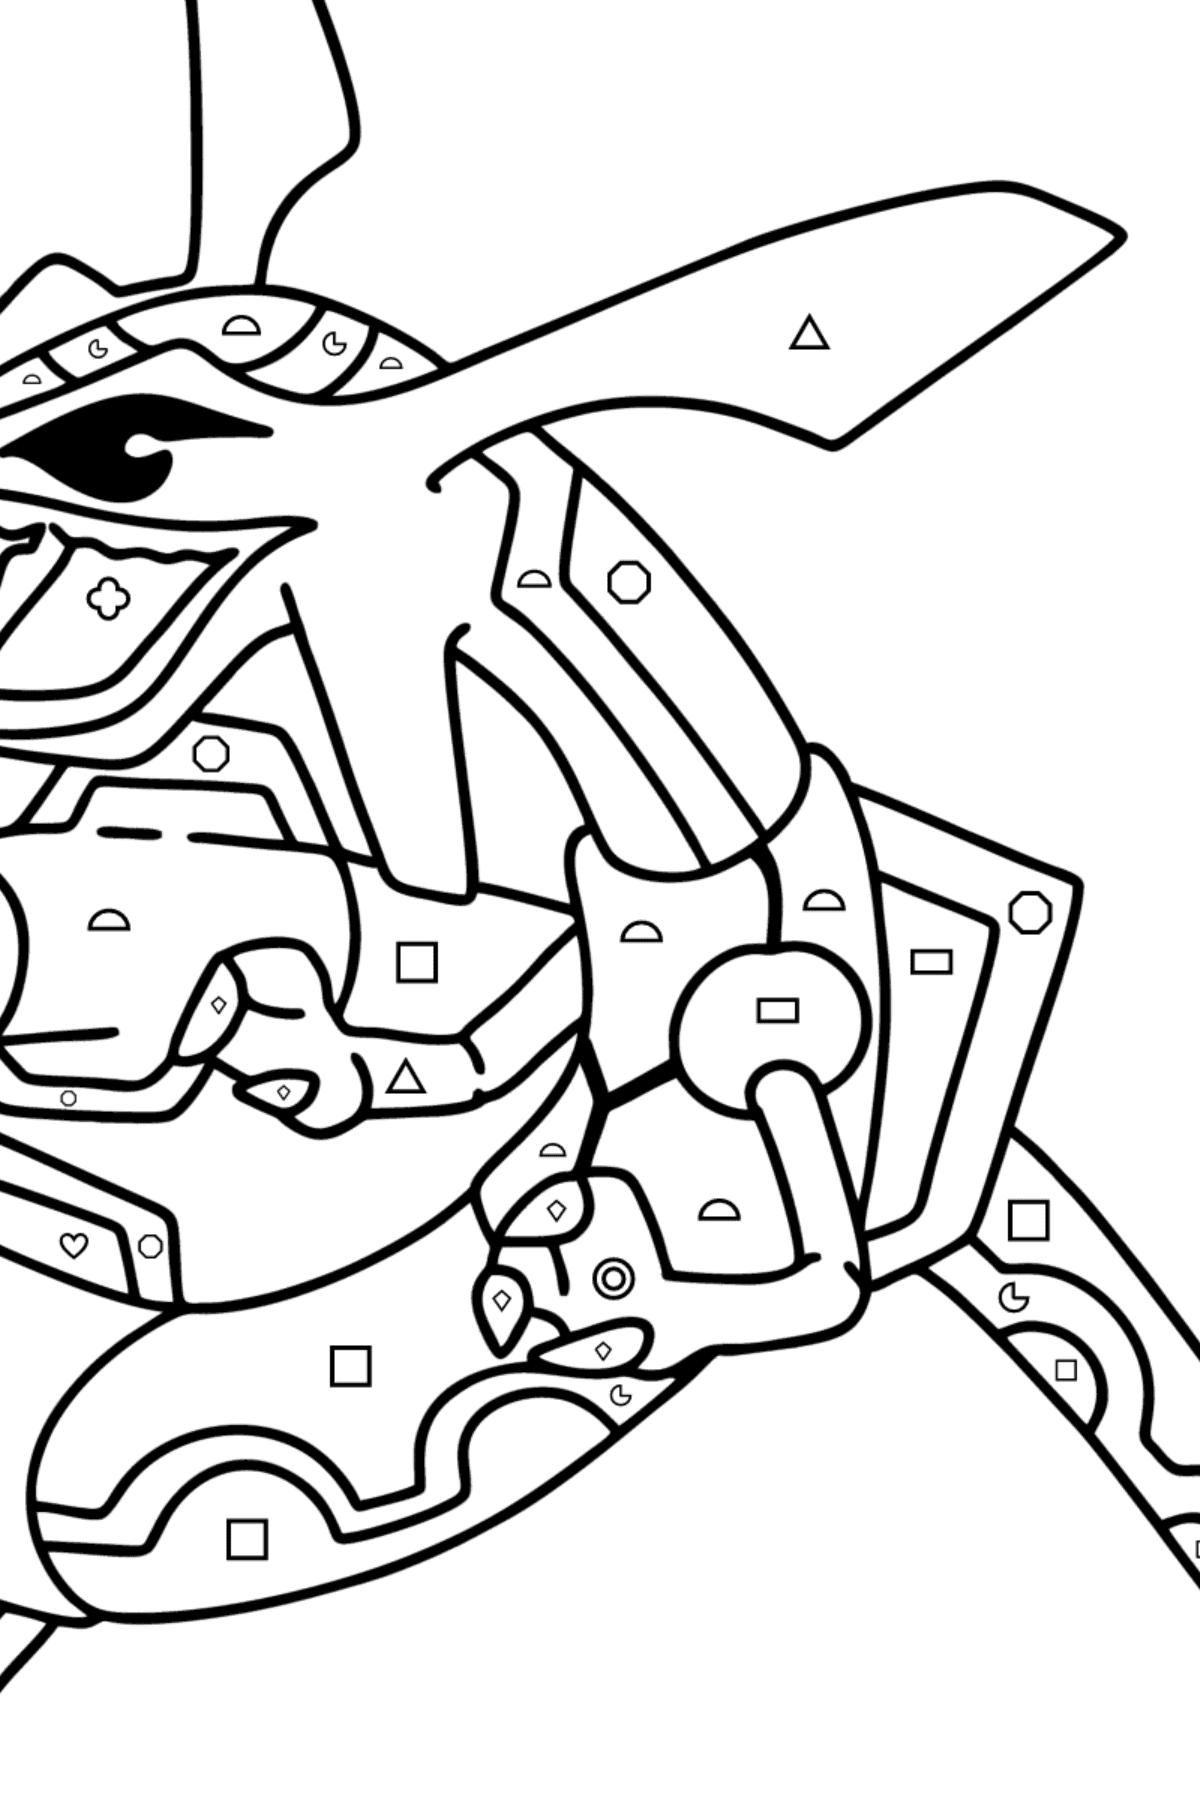 Coloring page Pokemon Go Rayquaza - Coloring by Geometric Shapes for Kids